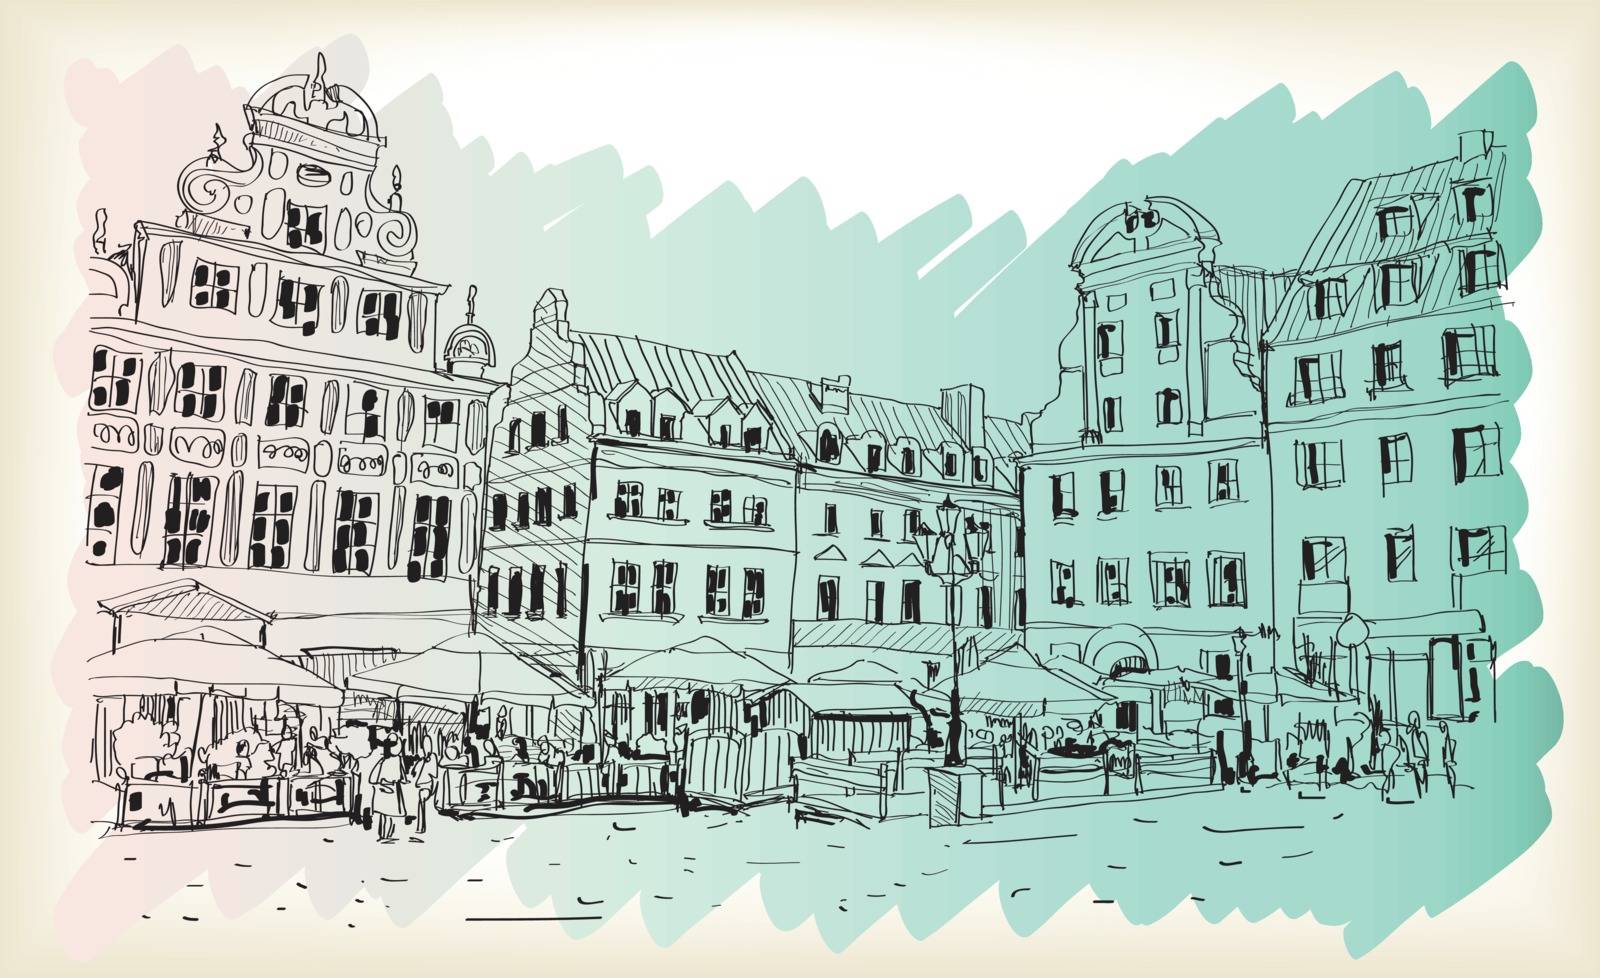 city scape drawing sketch in Poland downtown vector